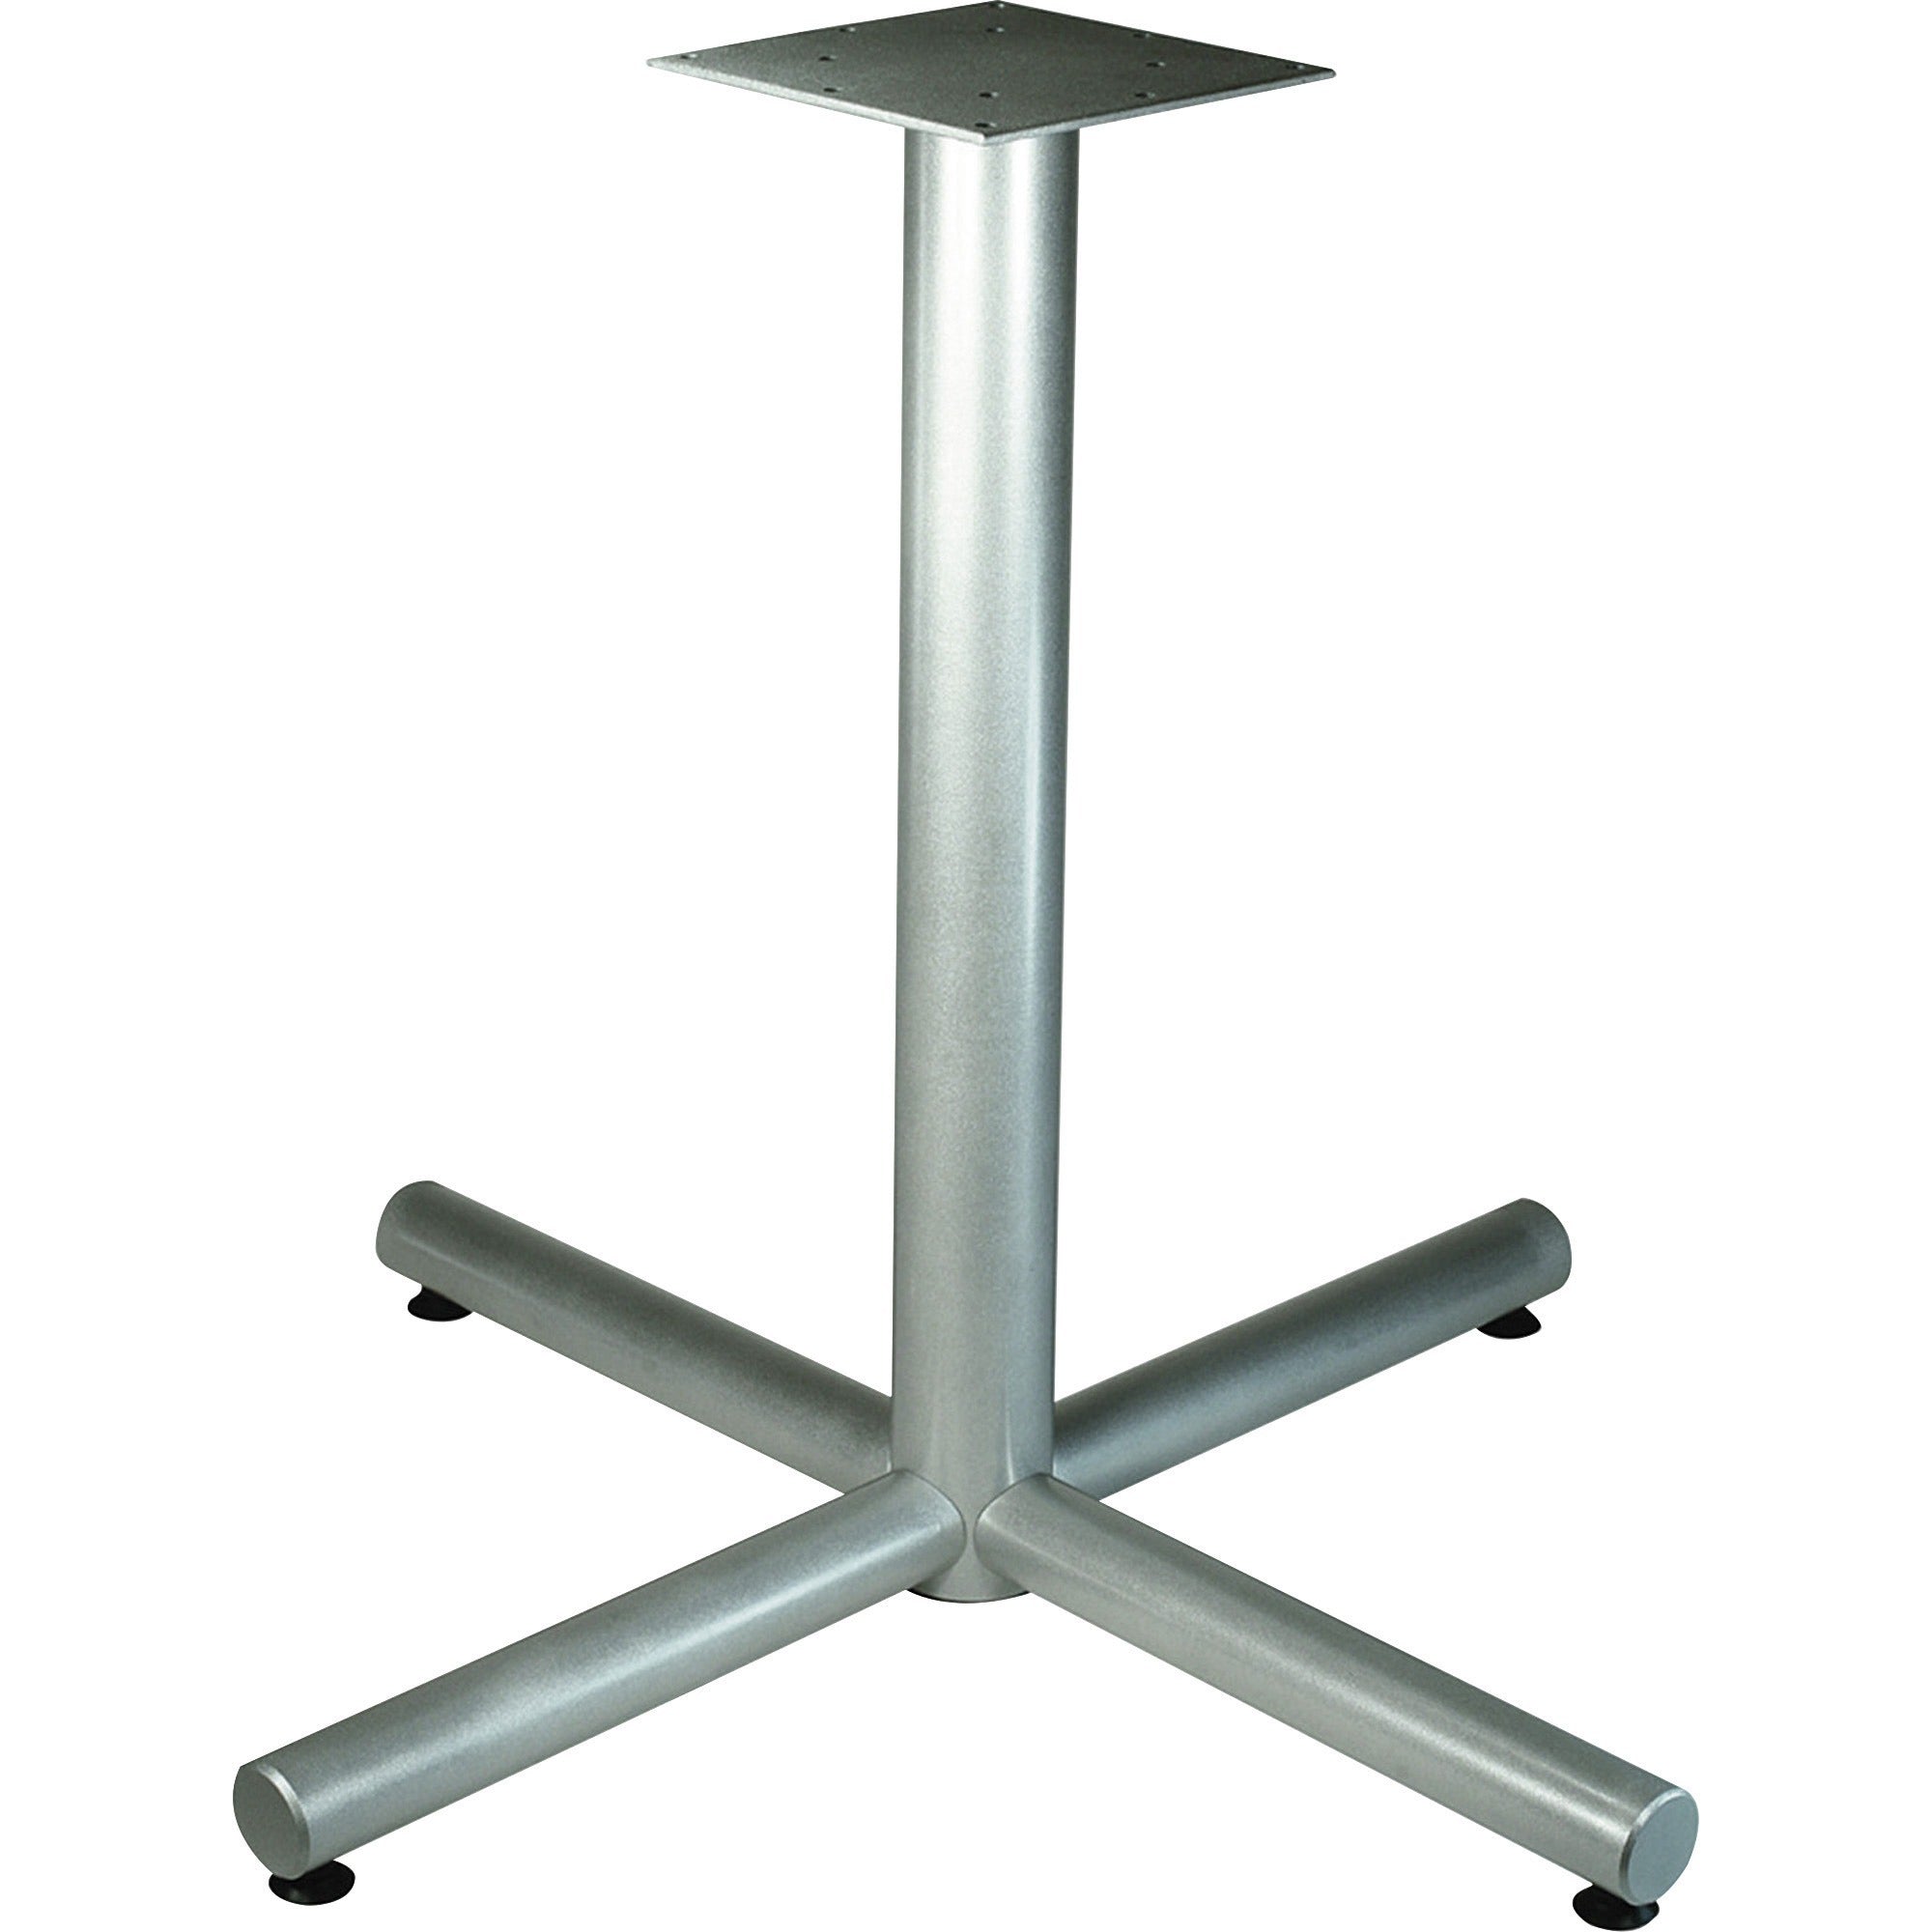 lorell-hospitality-cafe-height-table-x-leg-base-metallic-silver-x-shaped-base-30-height-x-42-width-x-42-depth-assembly-required-1-each_llr61630 - 1